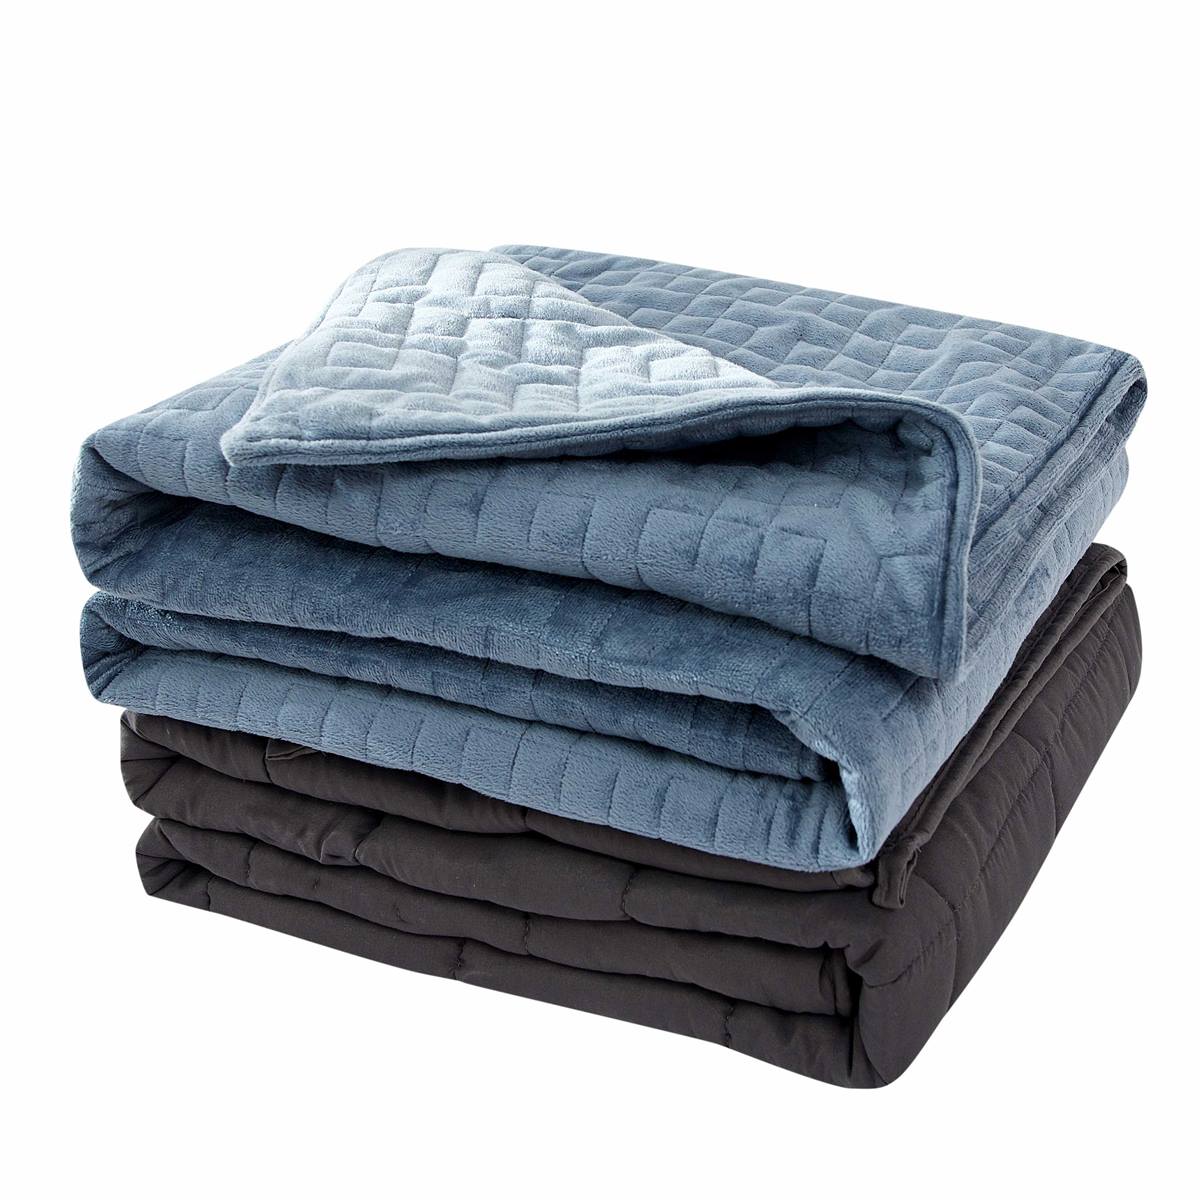 Sutton Home Washable Duvet Weighted Blanket